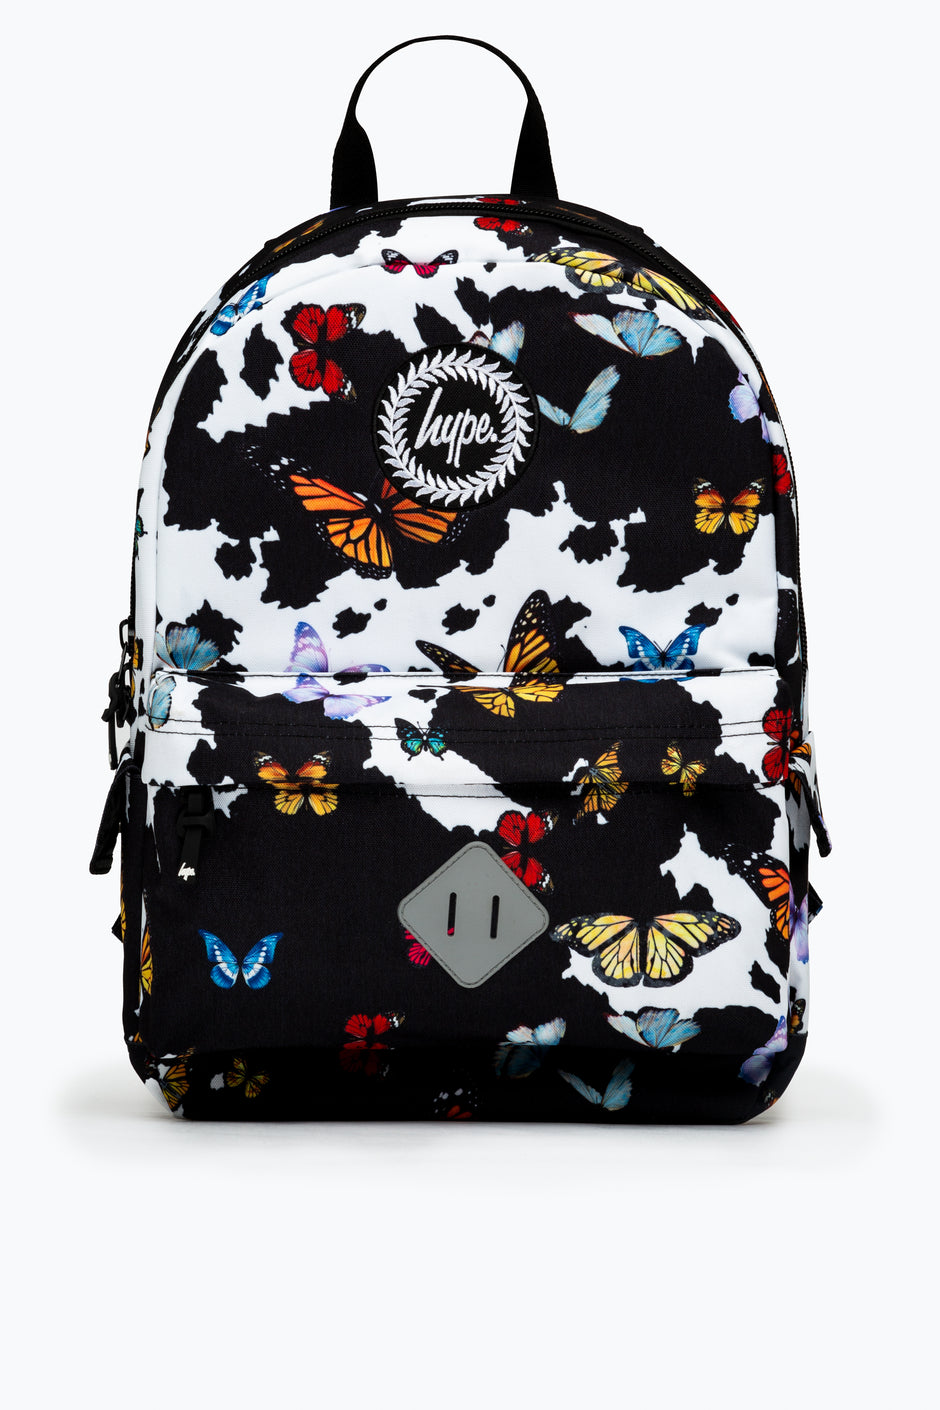 Affordable Backpacks for Kids and Adults | Hype.